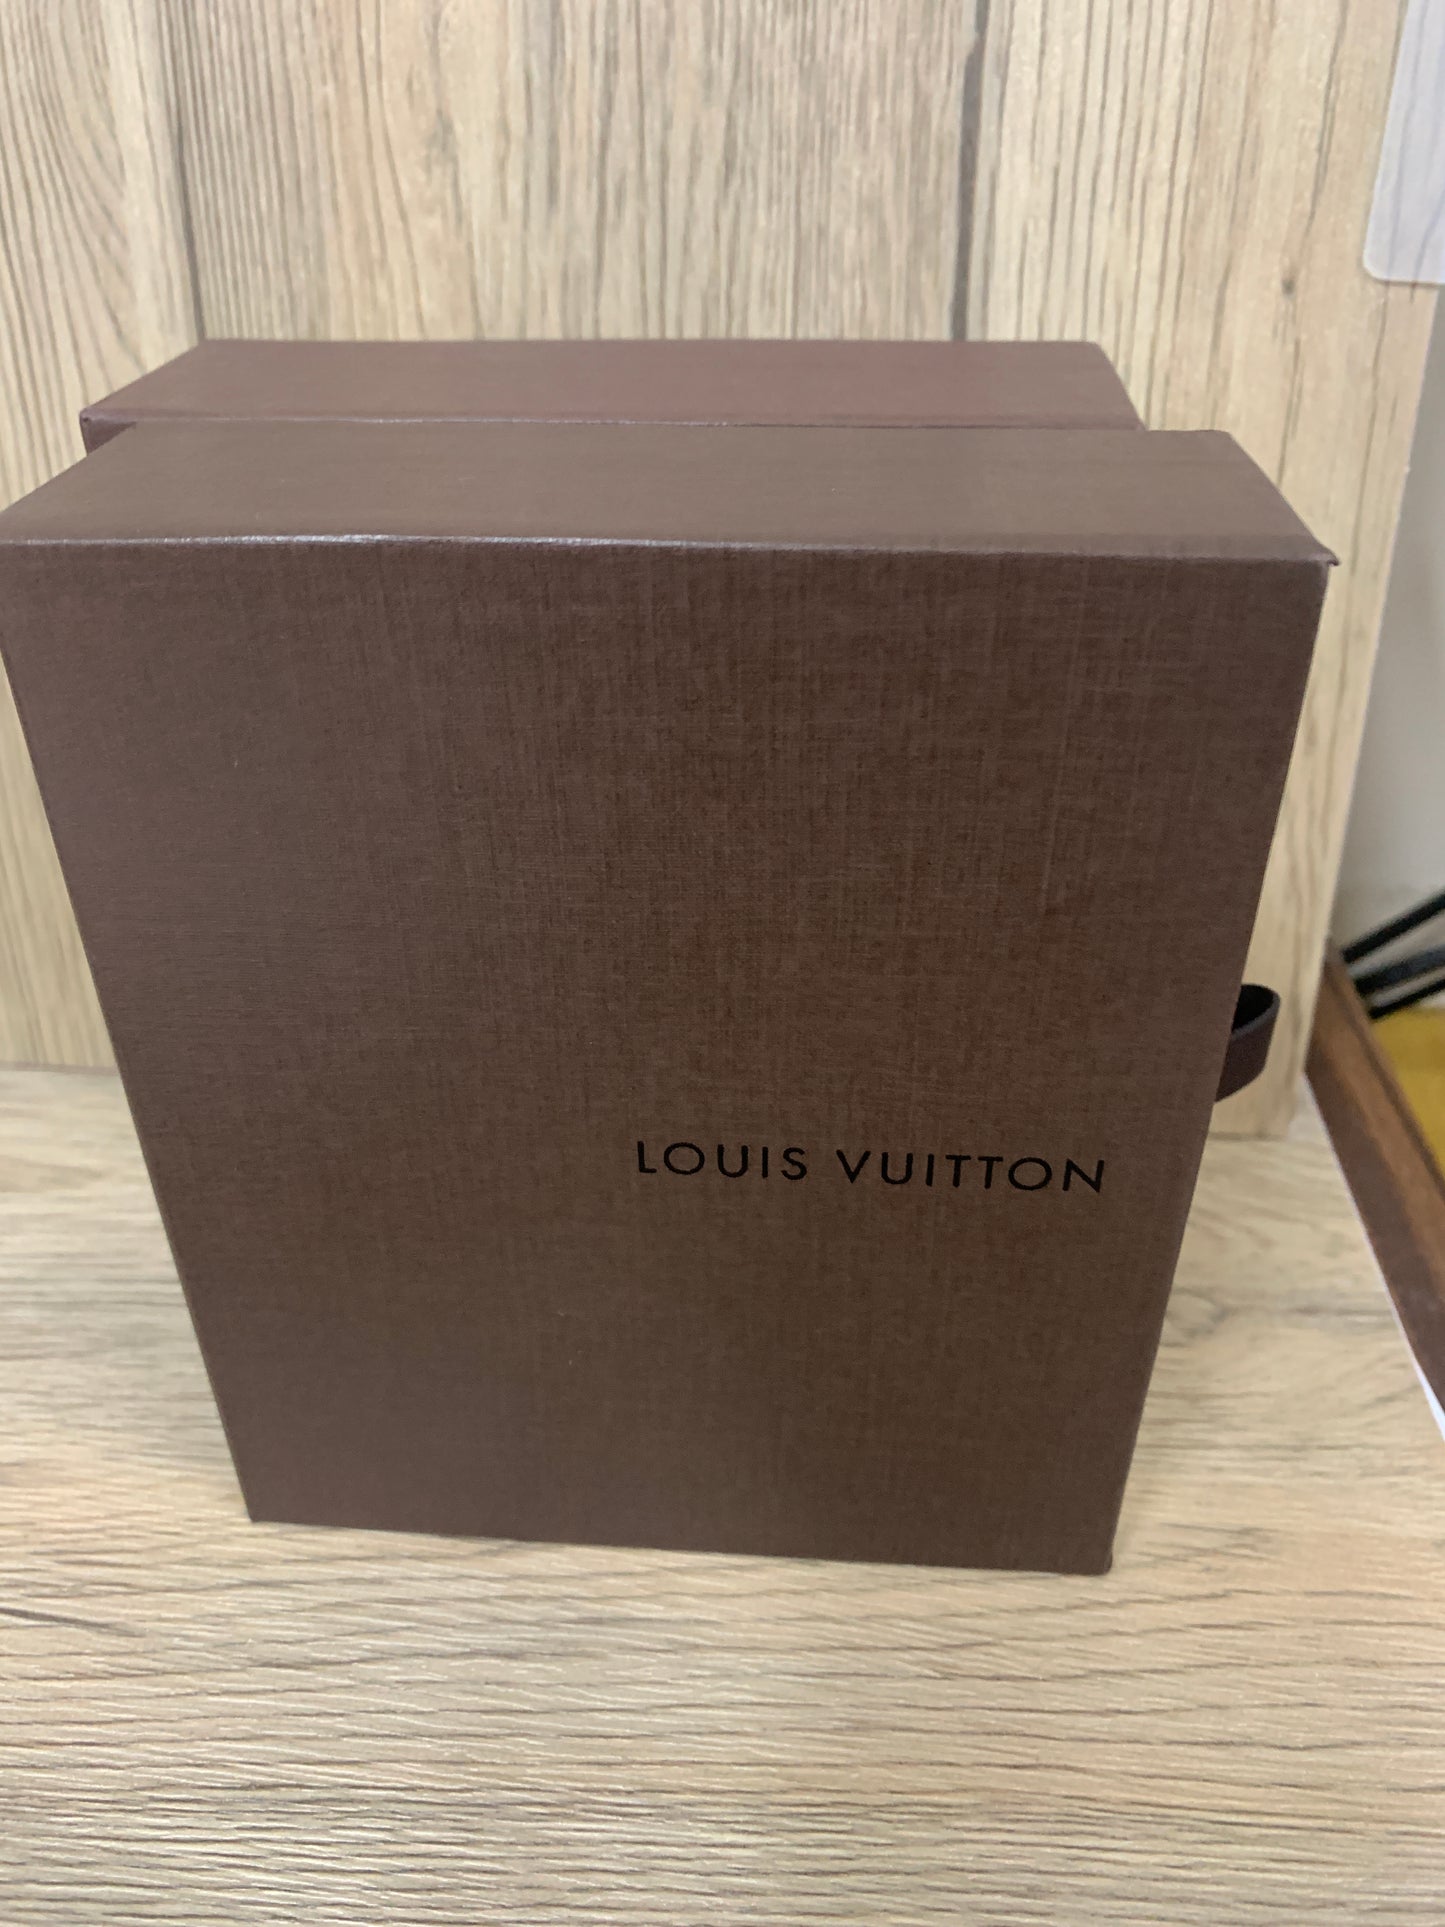 Louis Vuitton gift box LOT of 5 with Gift Bag - Pristine condition